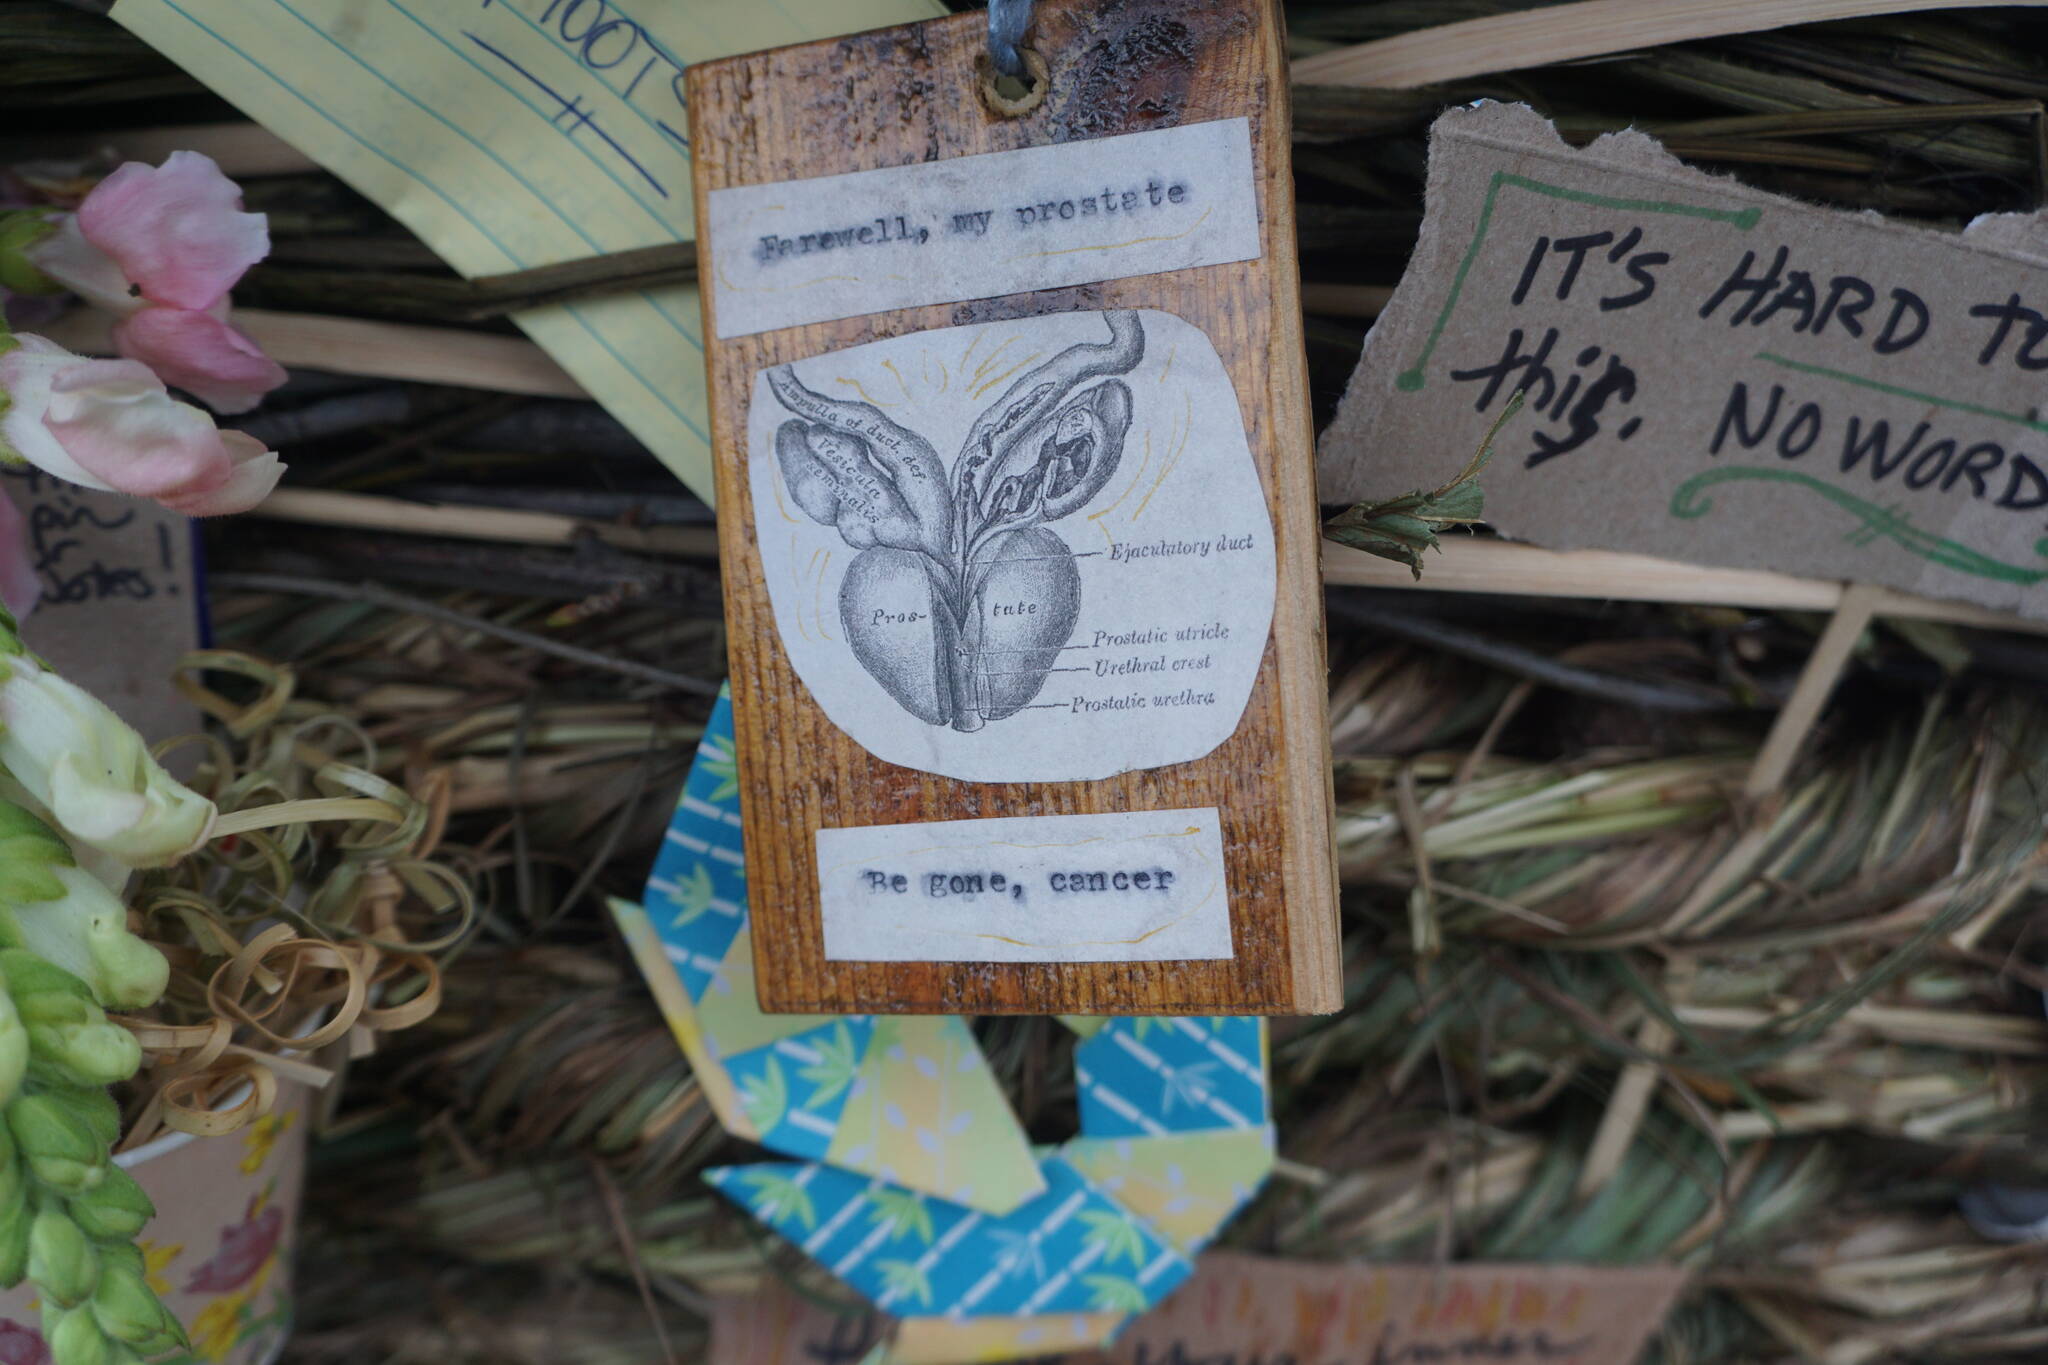 This artwork placed Sept. 11, 2022, on "Breathe," the 2022 Burning Basket in Homer, Alaska, expressed the author's hope that his prostate surgery would remove the cancer from his body. (Photo by Michael Armstrong/Homer News)